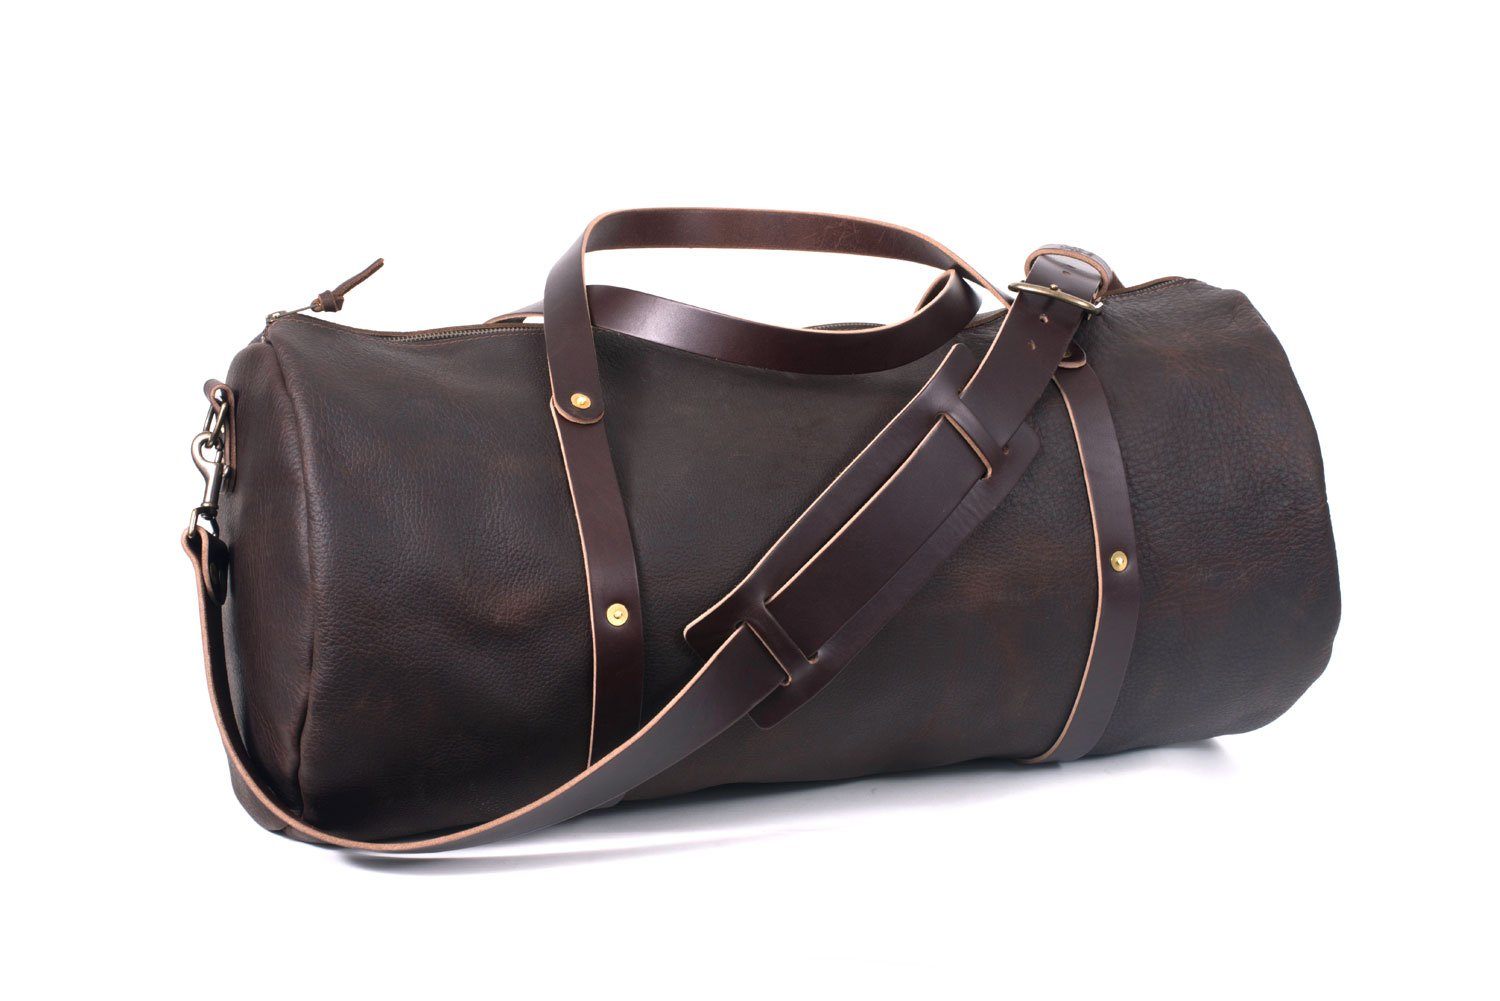 WILLIAM LEATHER DUFFLE BAG (READY TO SHIP)